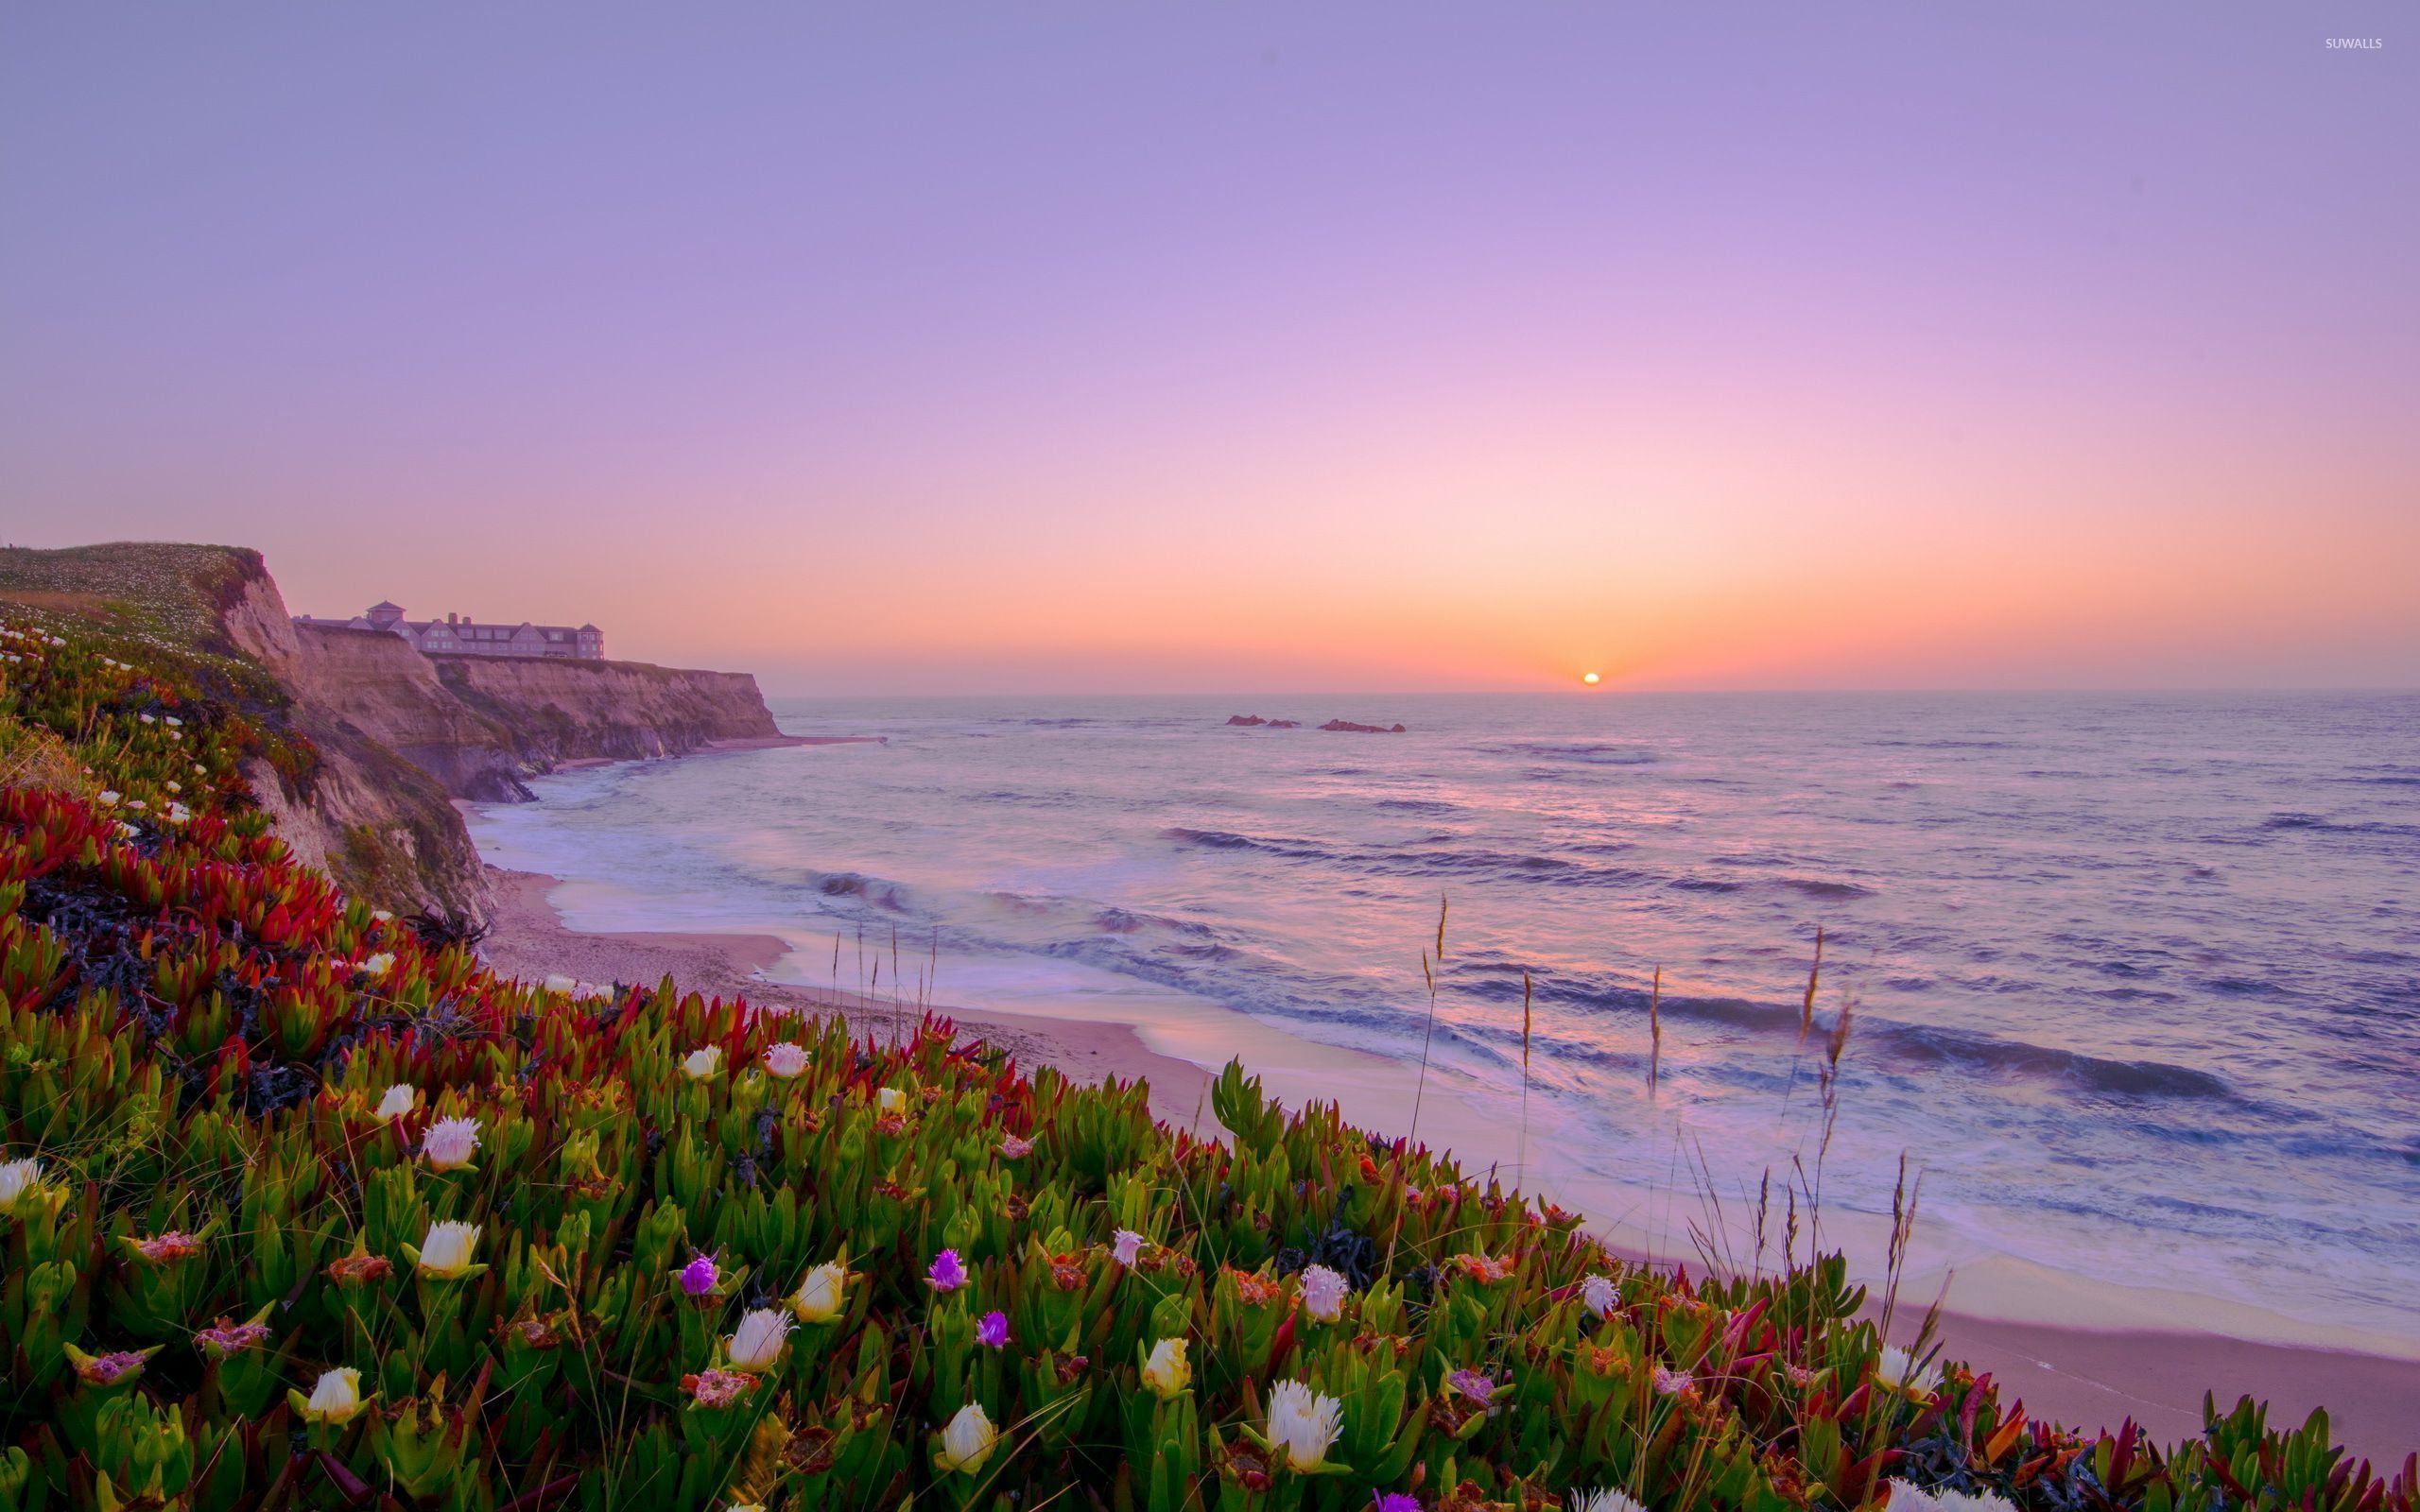 Sunset above a coast filled with colorful flowers wallpaper